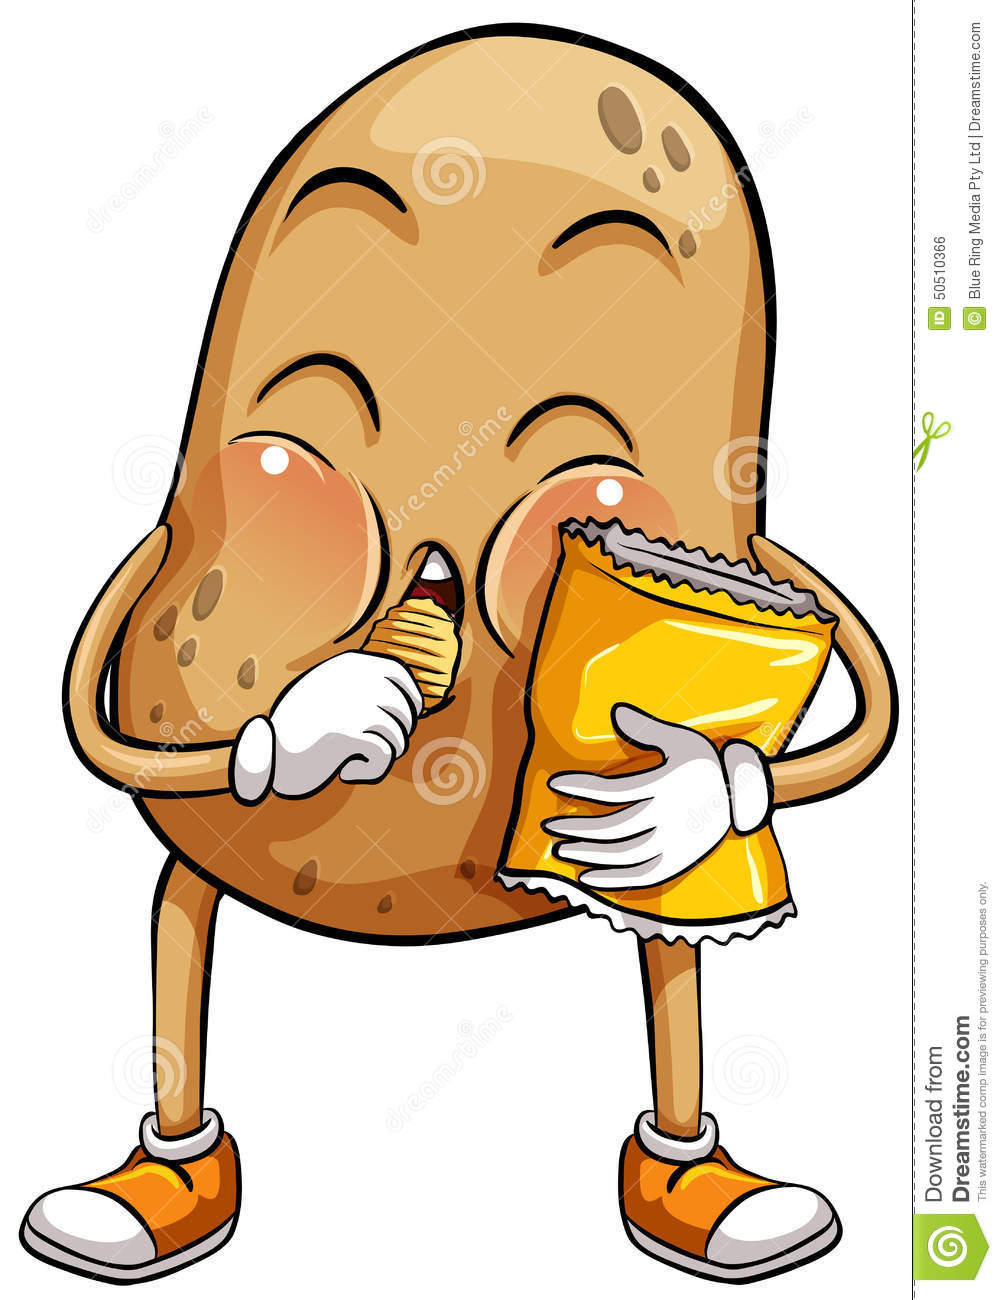 An Idiom Showing A Big Potato On A White Background